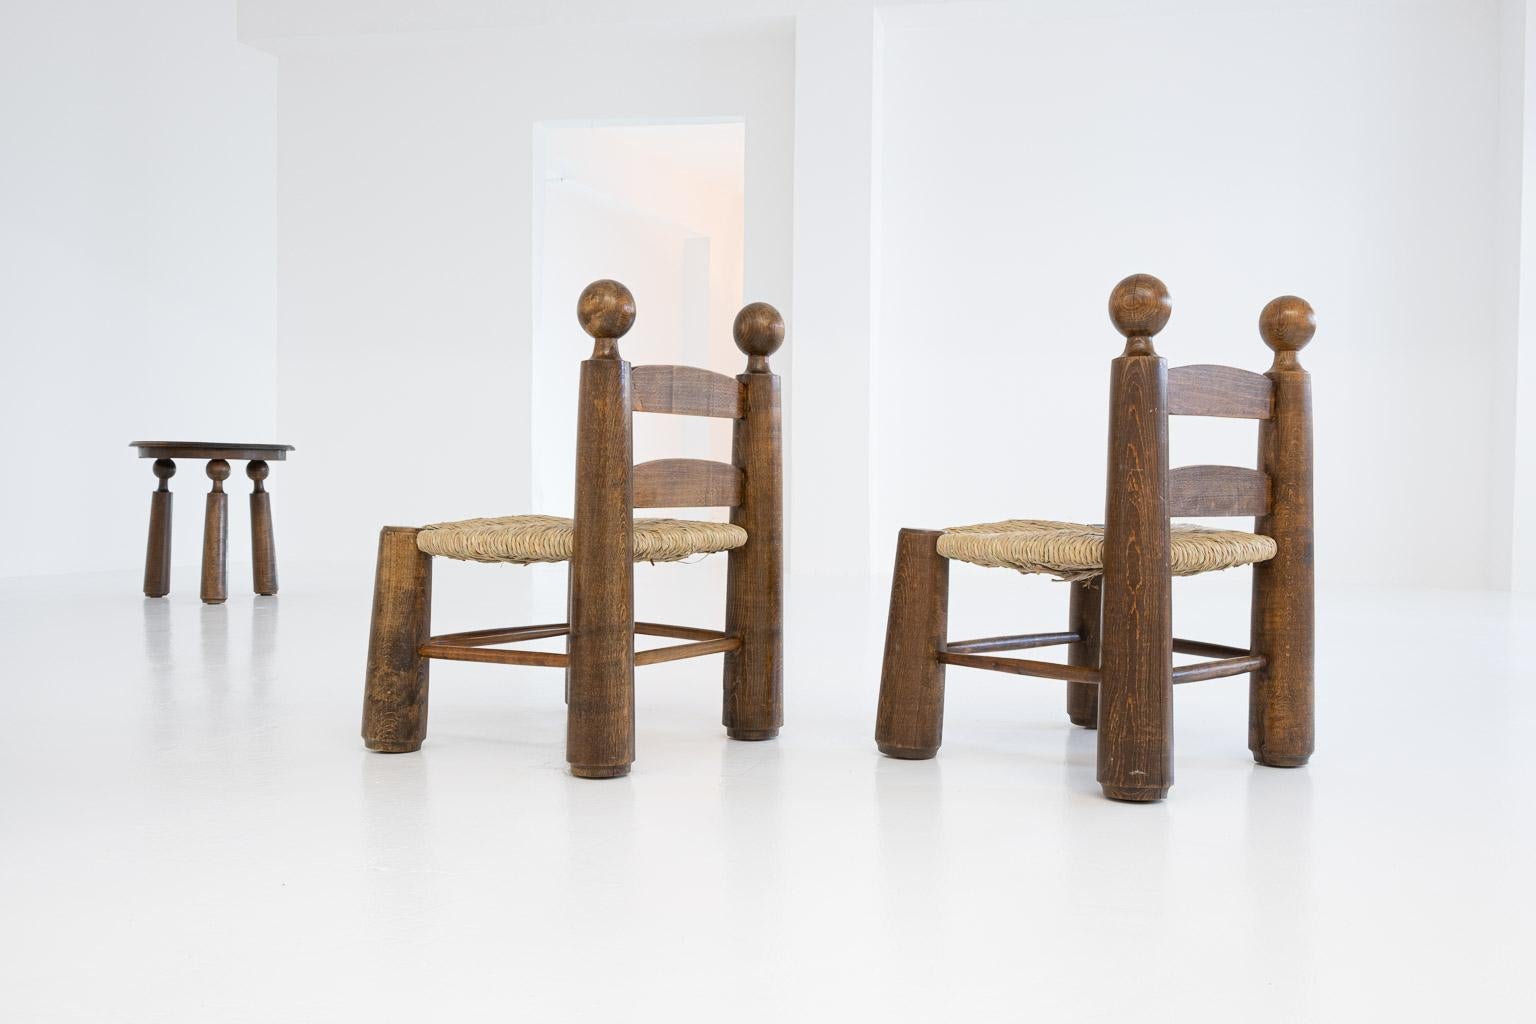 20th Century Modern Rustic, Brutalistic Table / Chair Set by Charles Dudouyt, France, 1940s For Sale